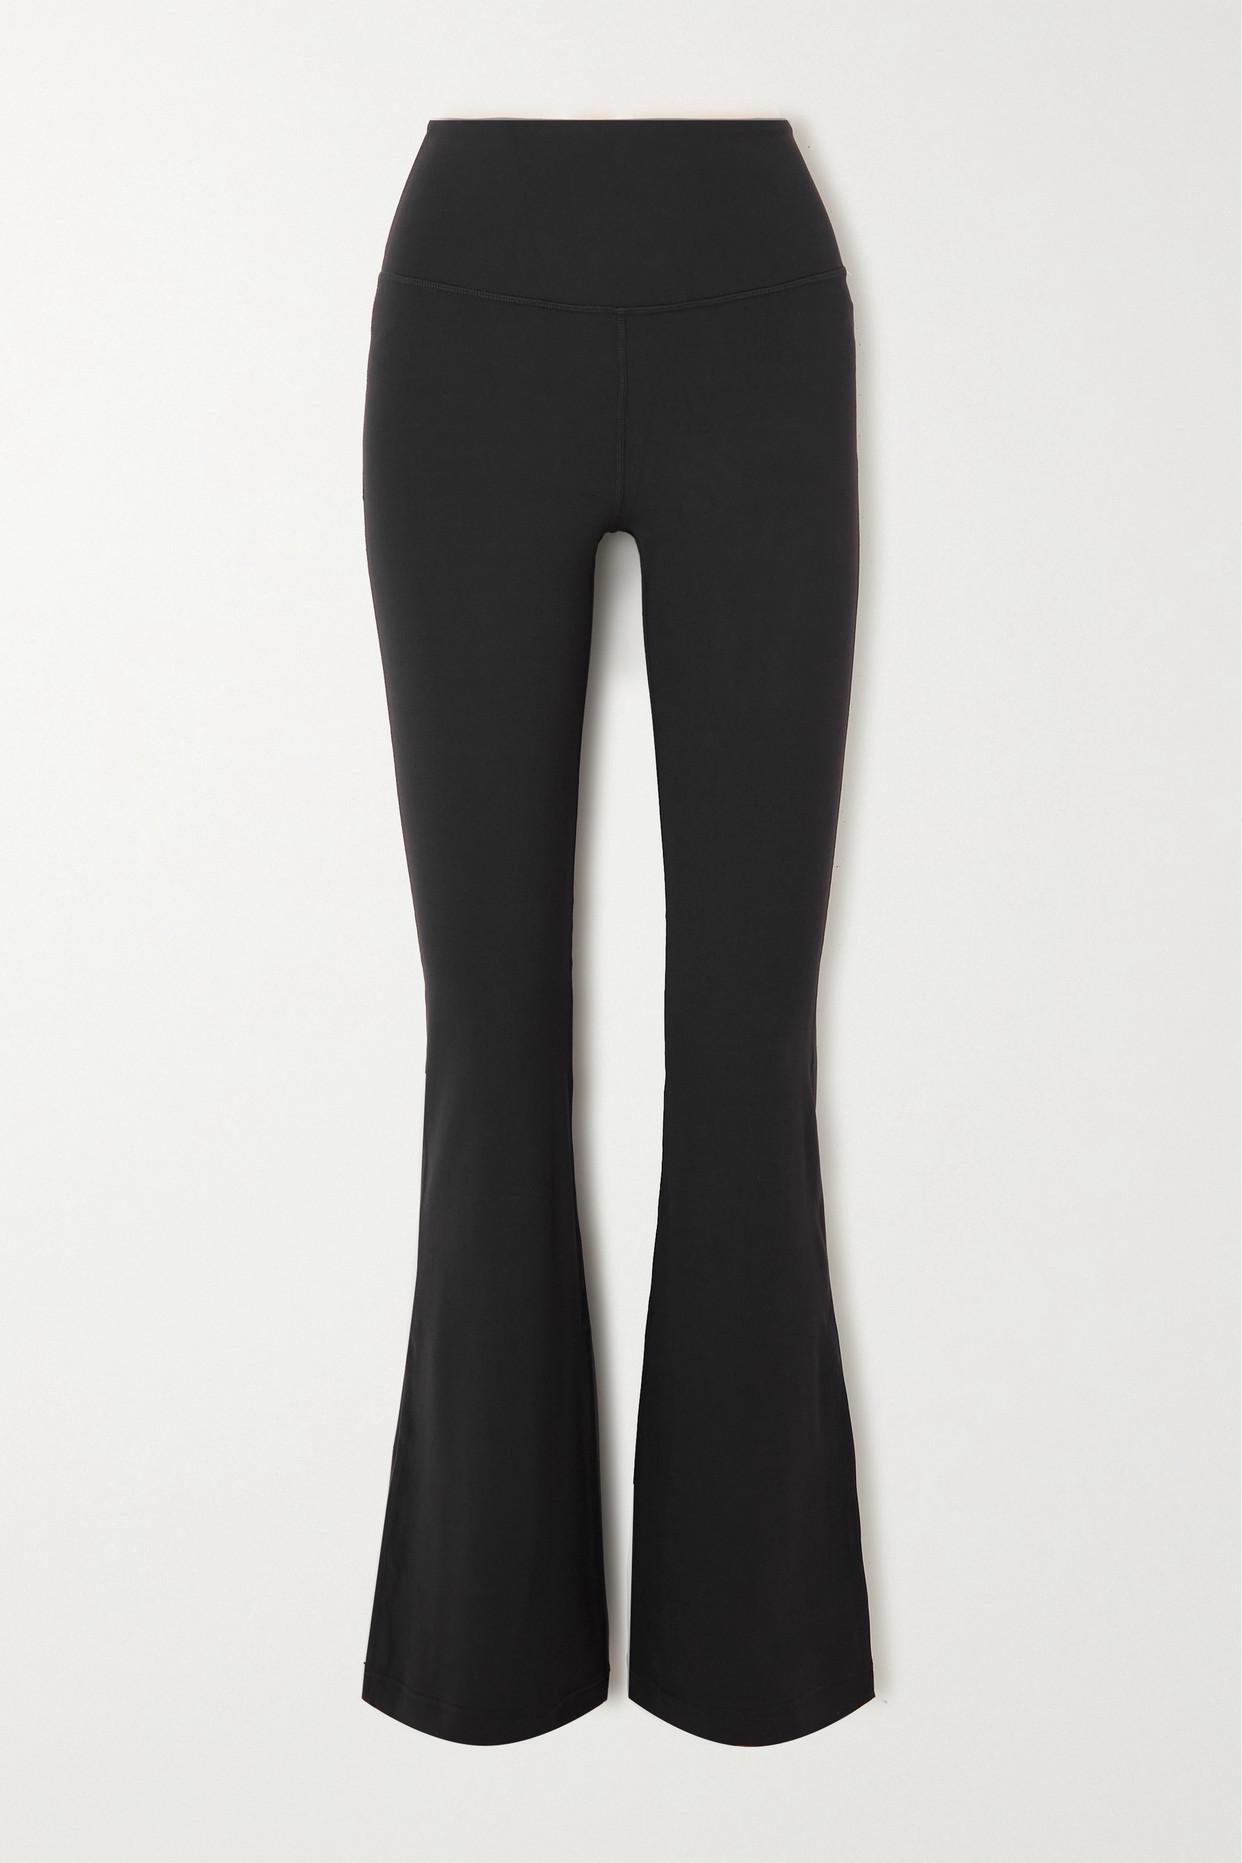 lululemon athletica Groove Stretch Flared Pants in Black